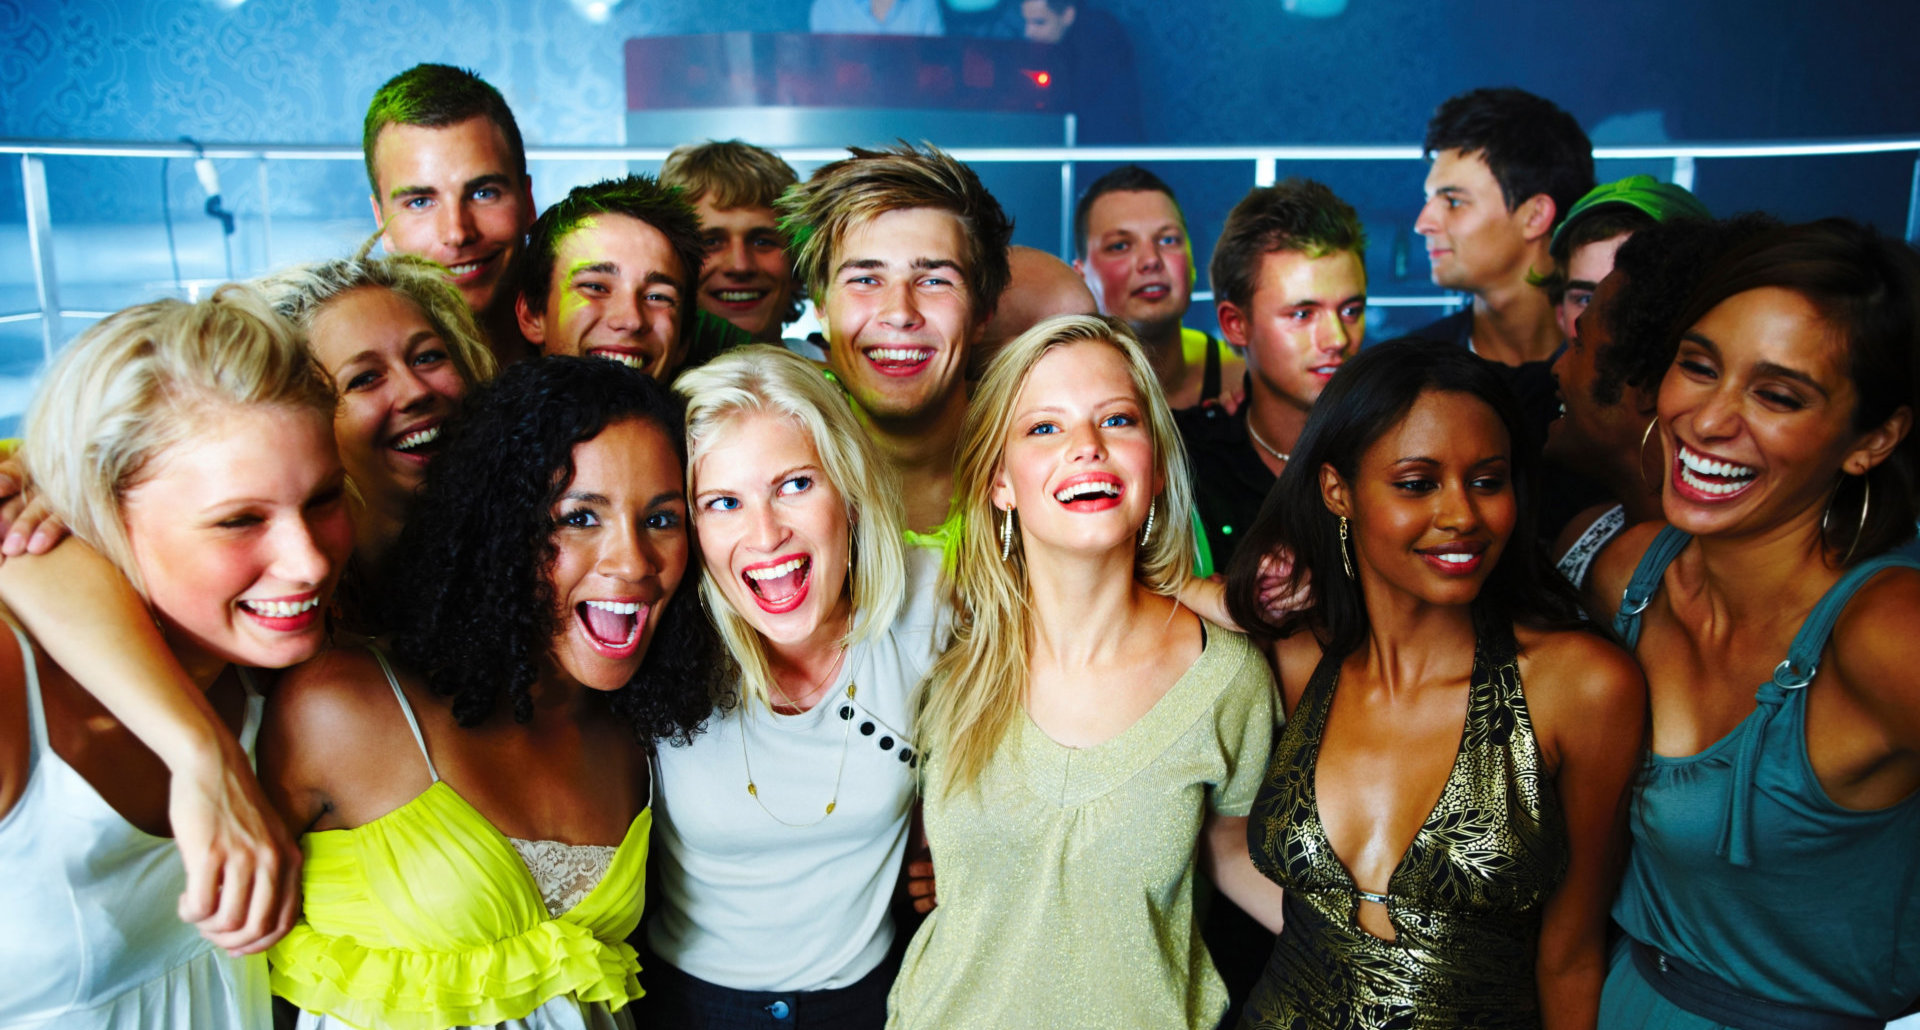 Group of happy young boys and girls standing together in club